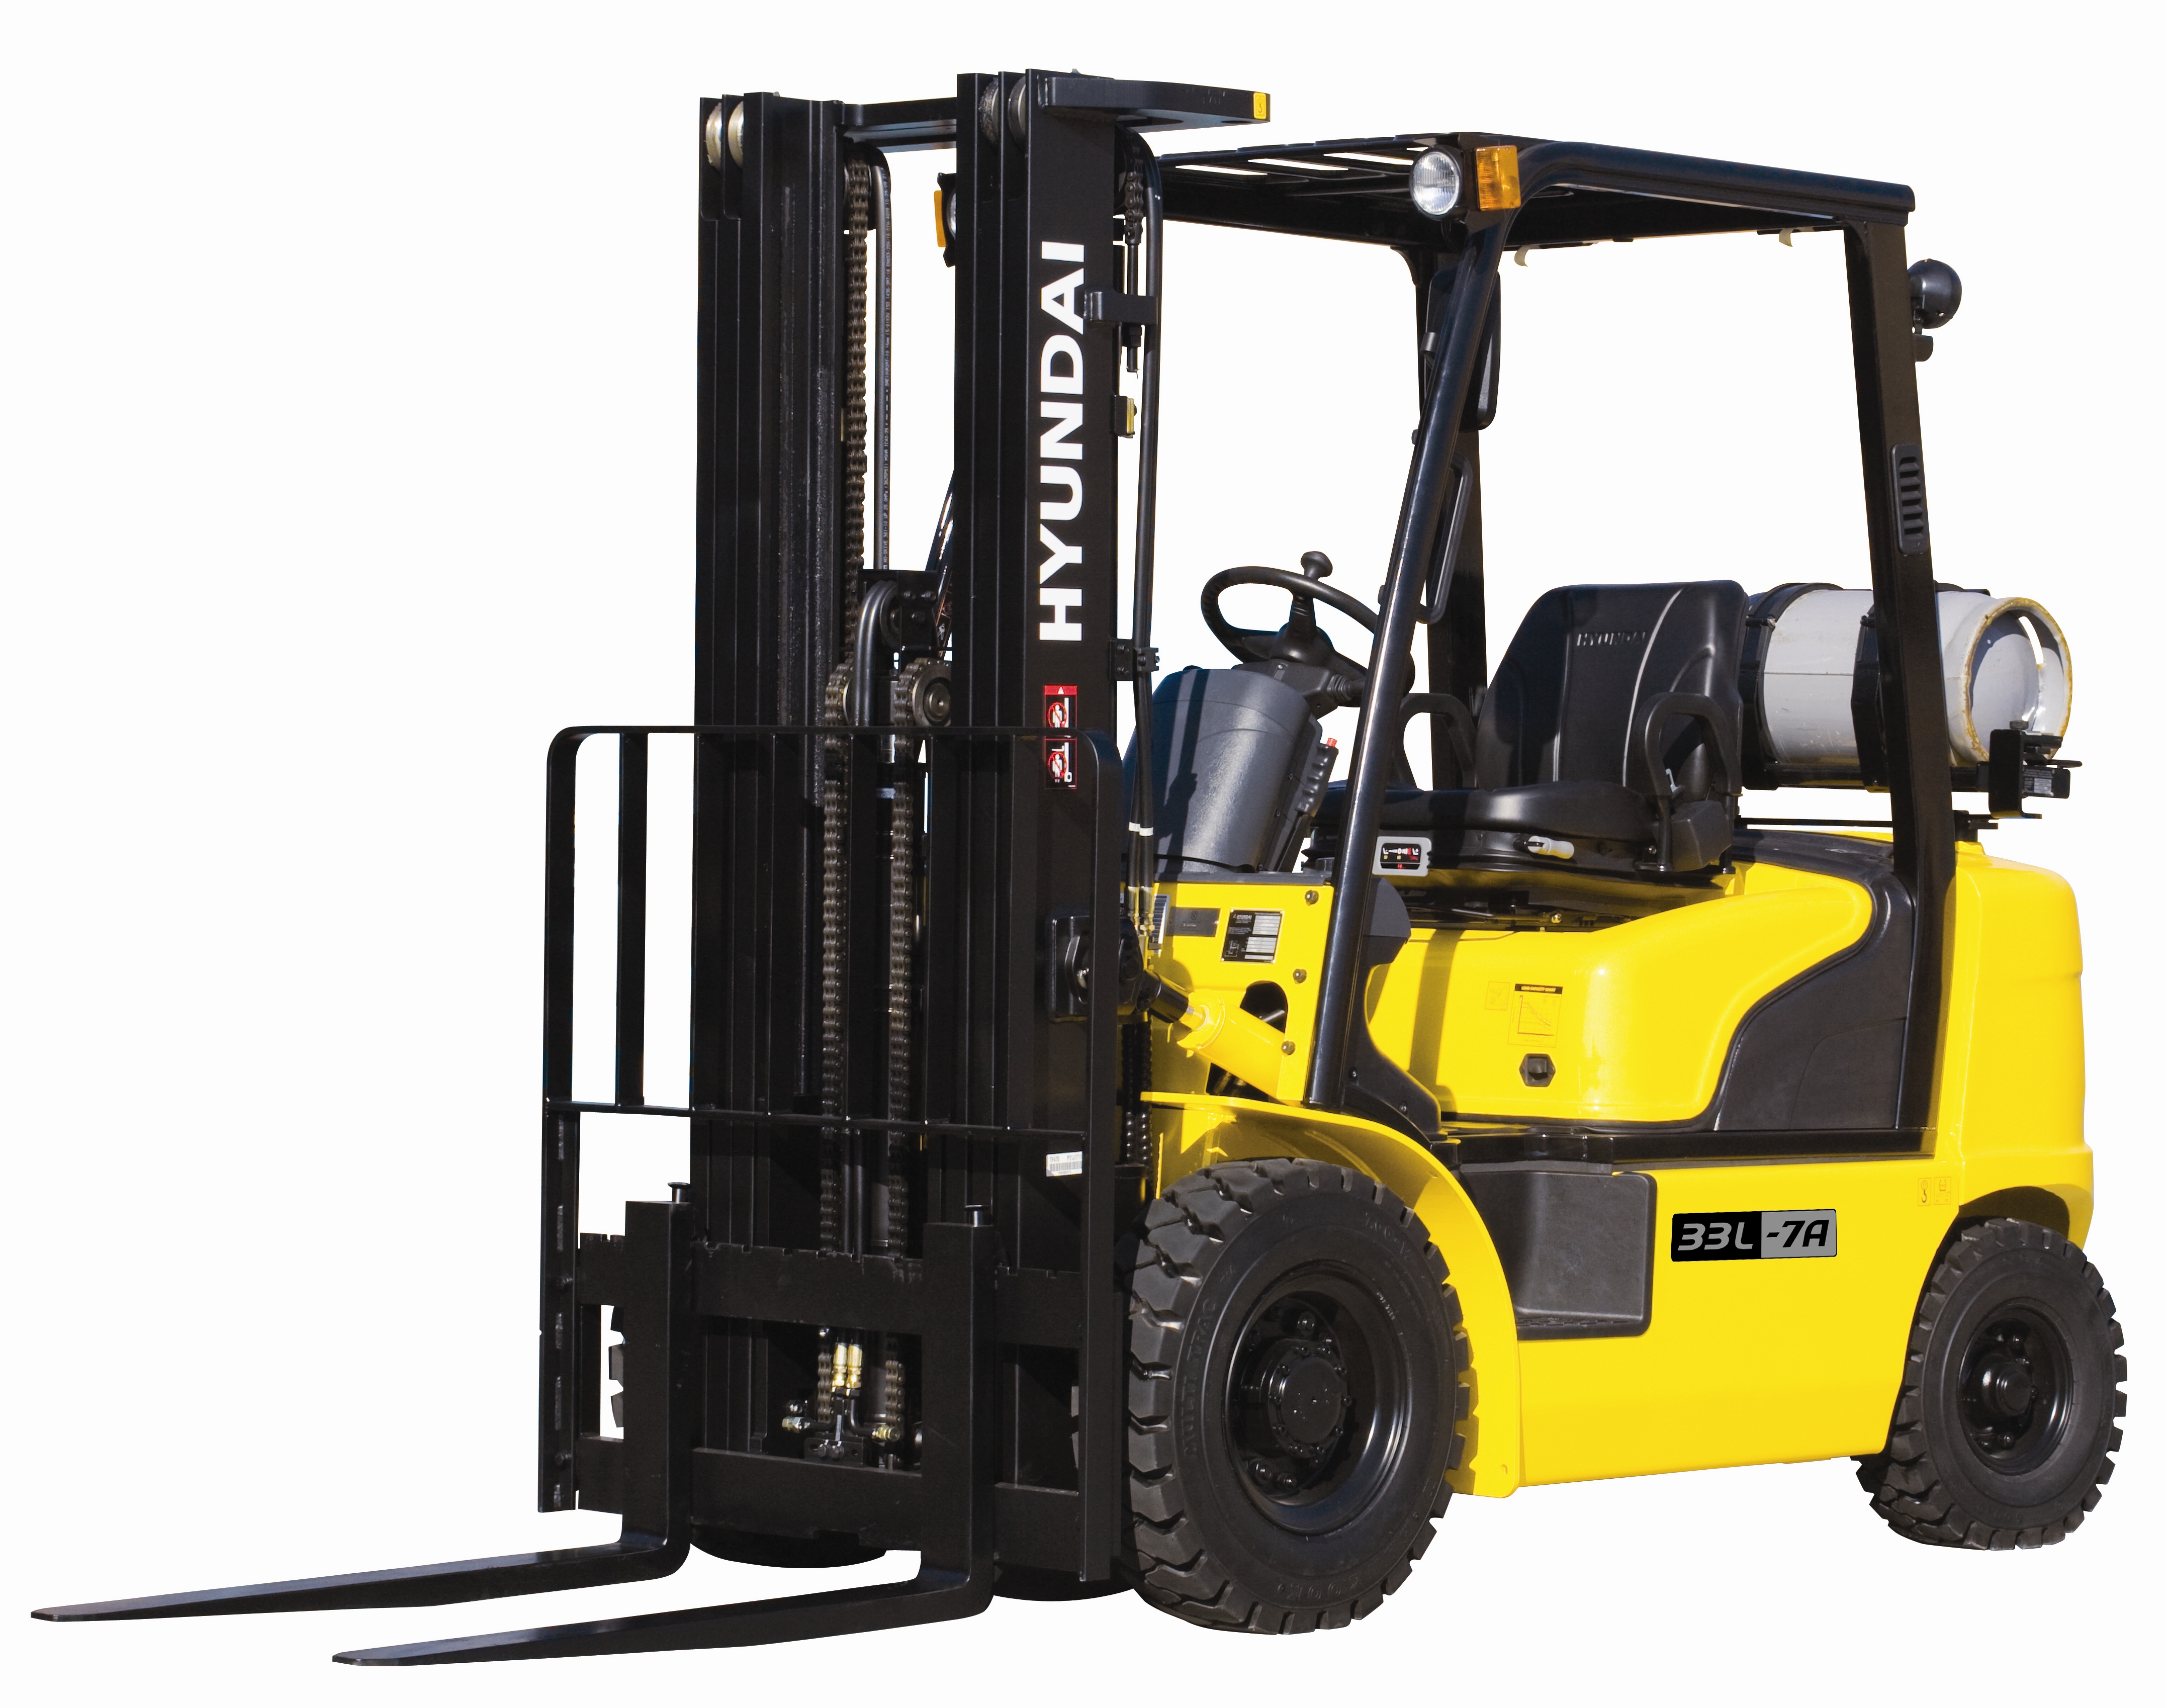 Forklift Wallpapers Vehicles Hq Forklift Pictures 4k Wallpapers 2019